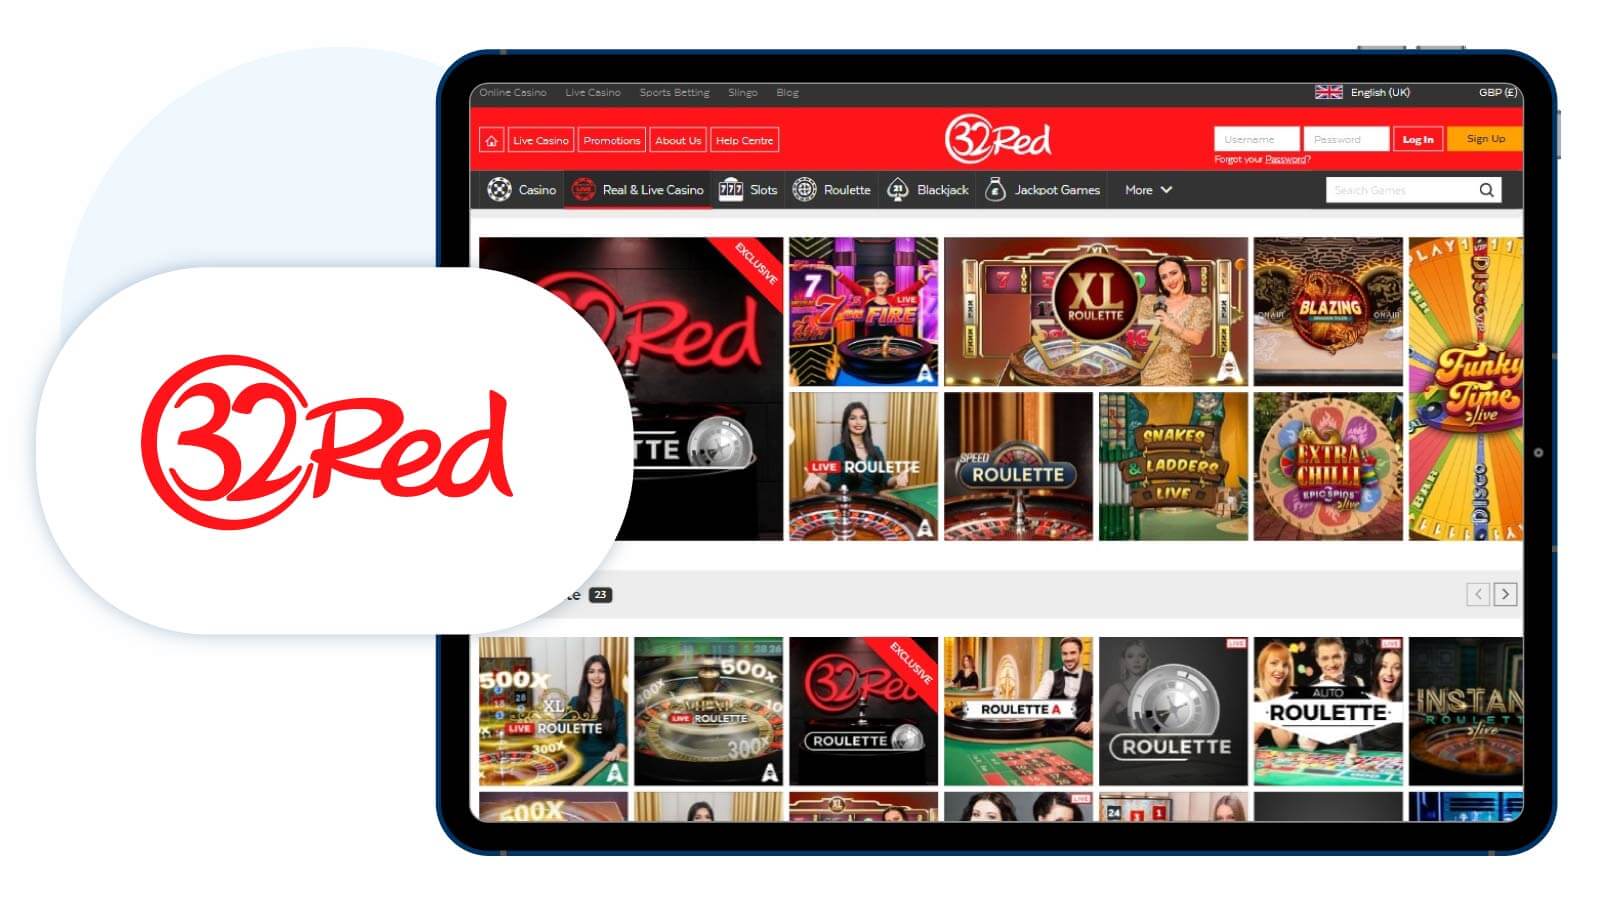 32Red-Casino-Top-live-online-casino-for-low-rollers